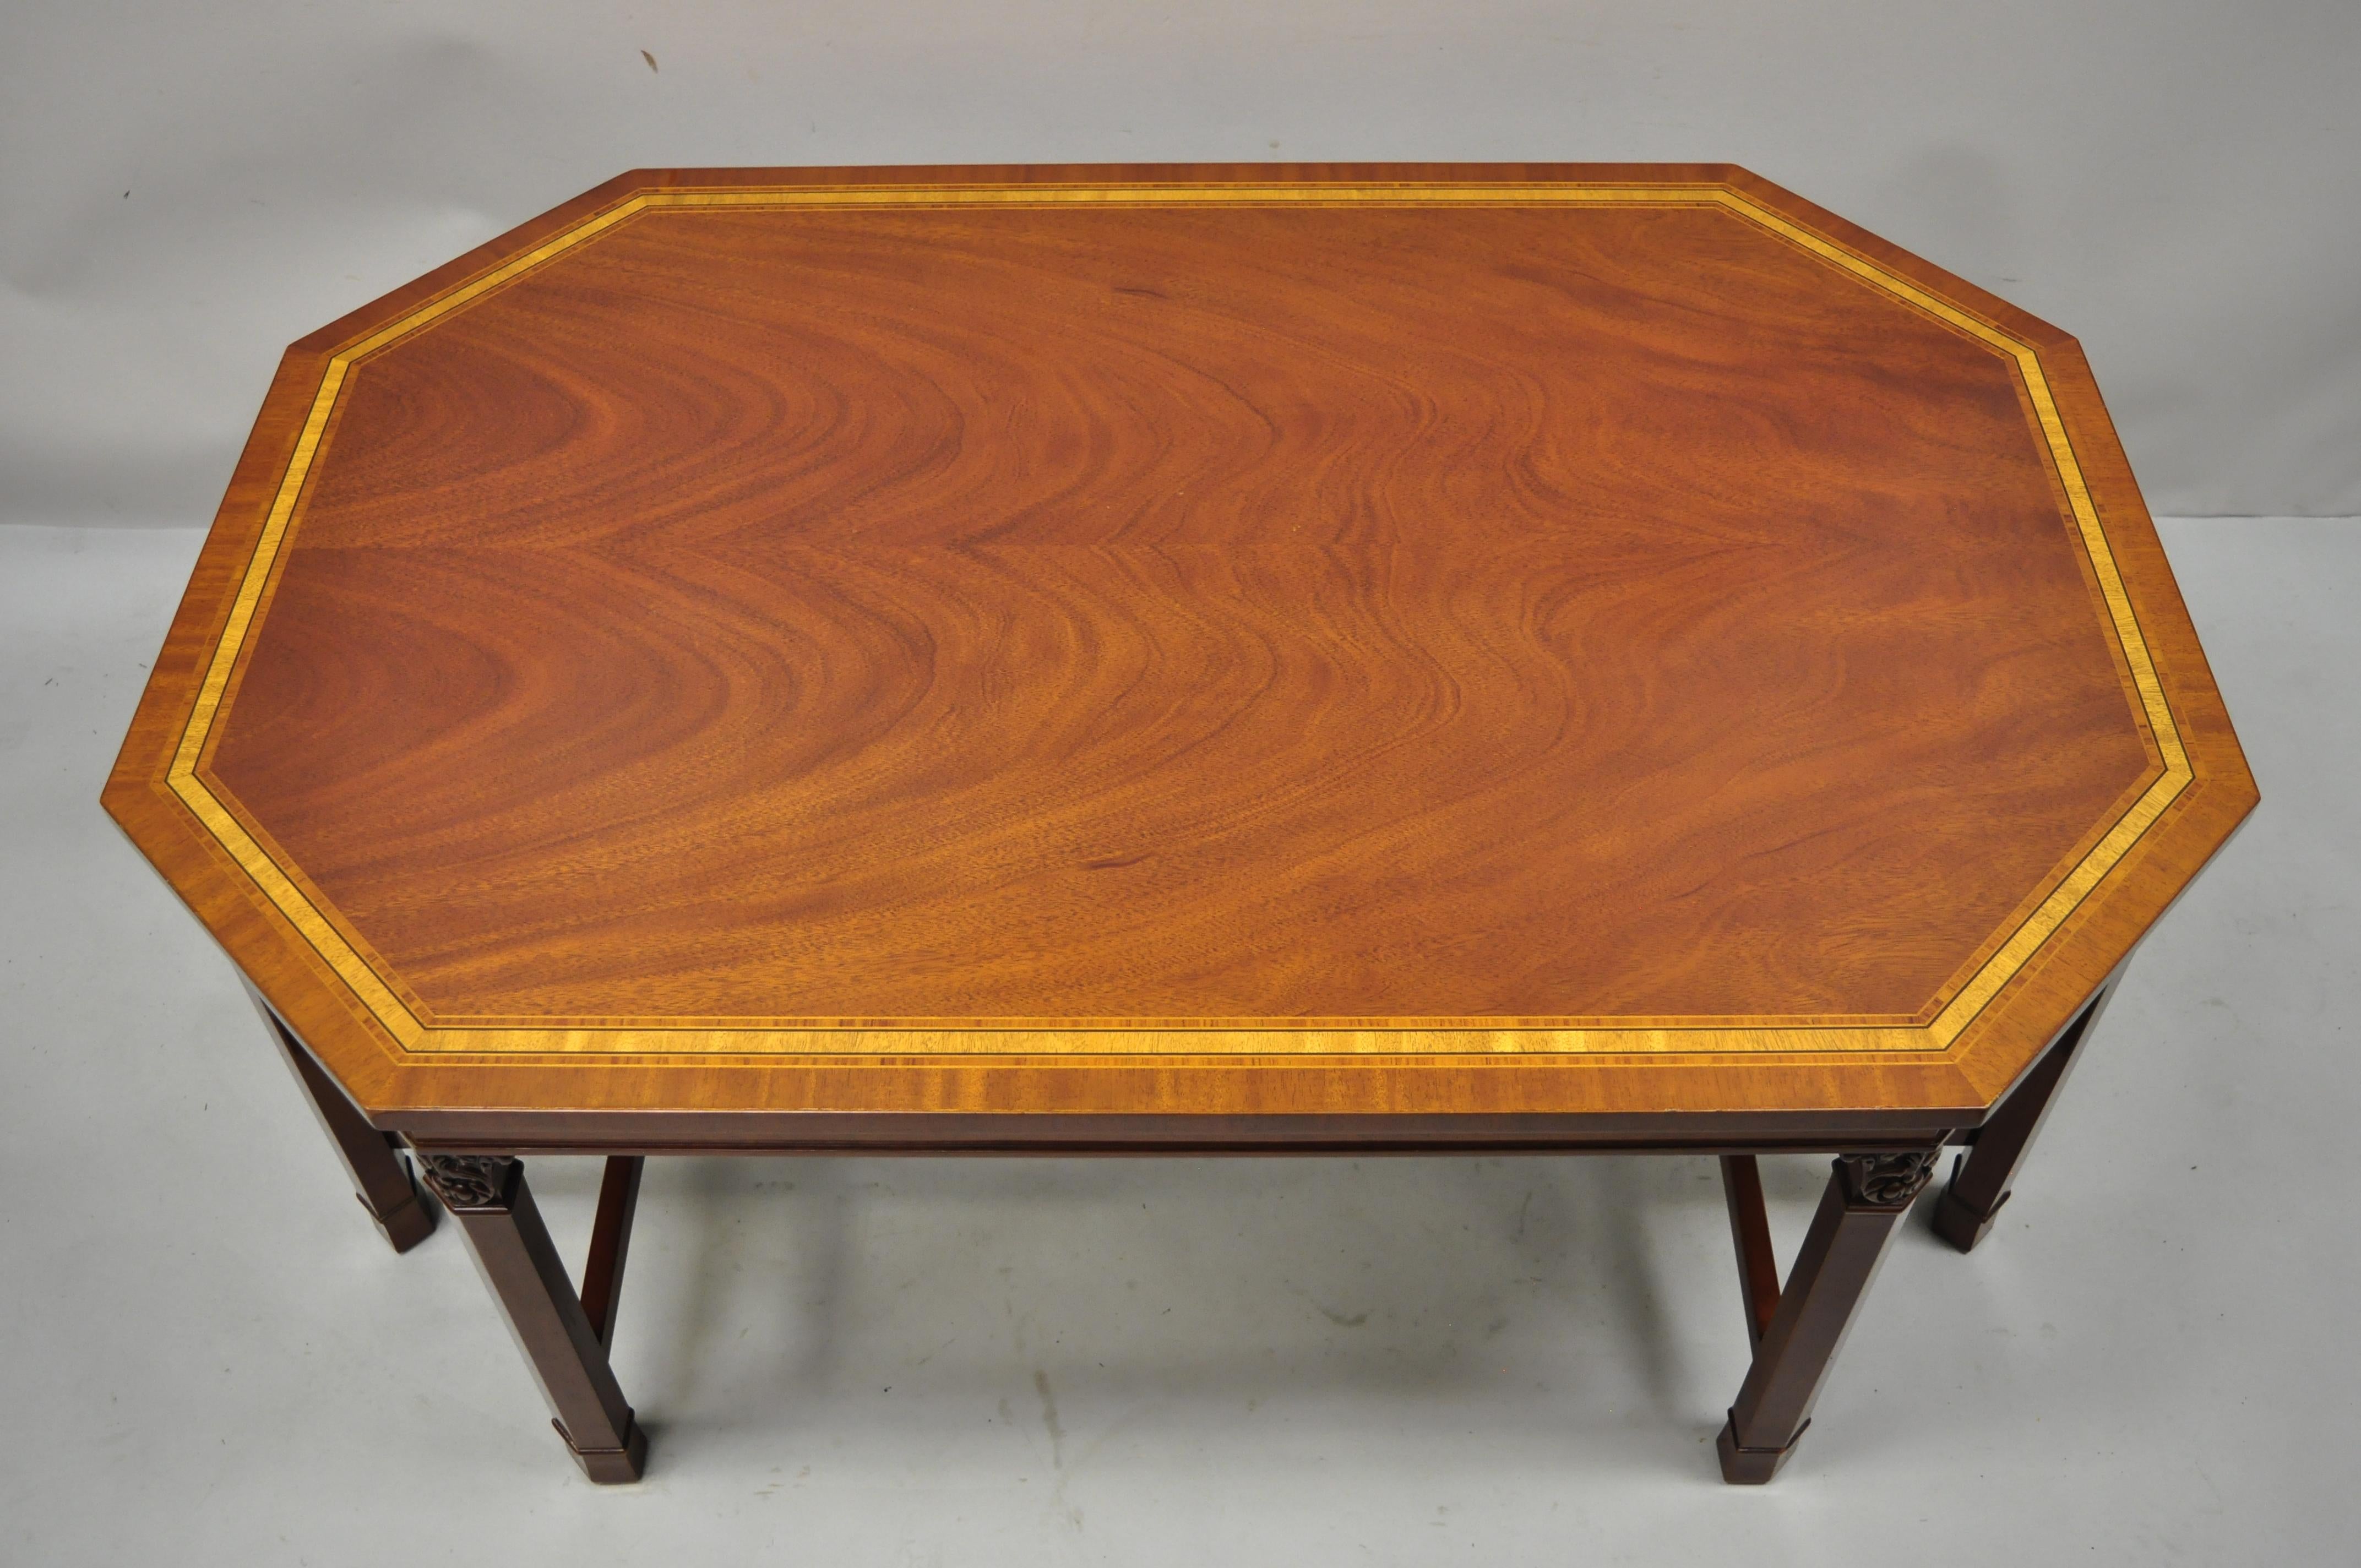 Kindel Mahogany English Georgian satinwood banded inlay 8 leg kent coffee table. Item features (8) legs, banded satinwood inlay, solid wood construction, beautiful wood grain, quality American craftsmanship, great style and form, Circa early 21st